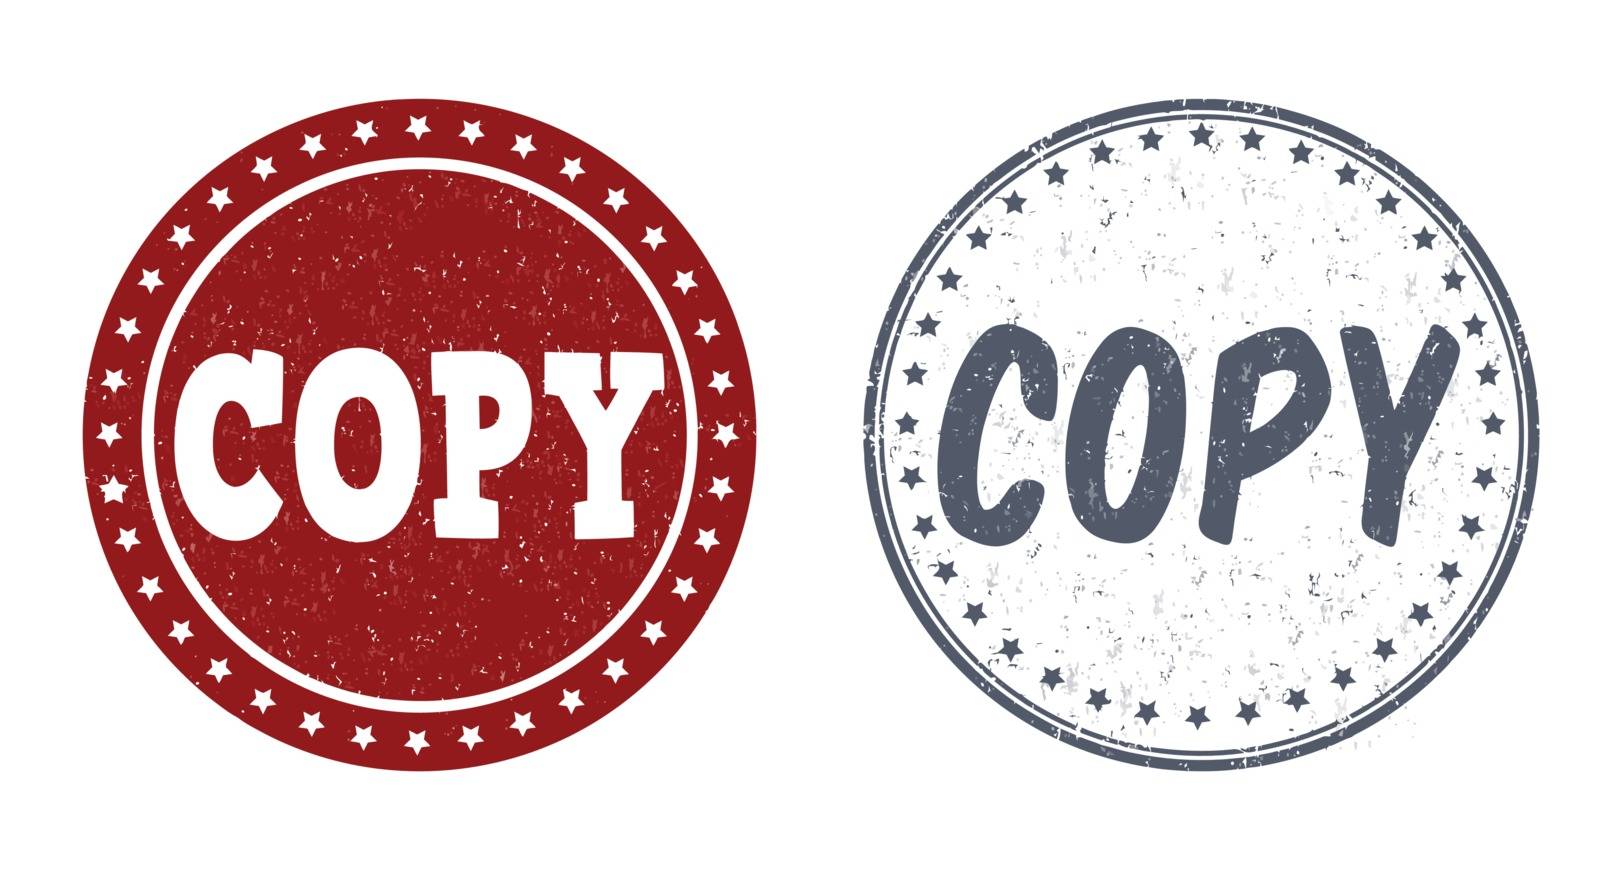 Copy grunge rubber stamps on white, vector illustration